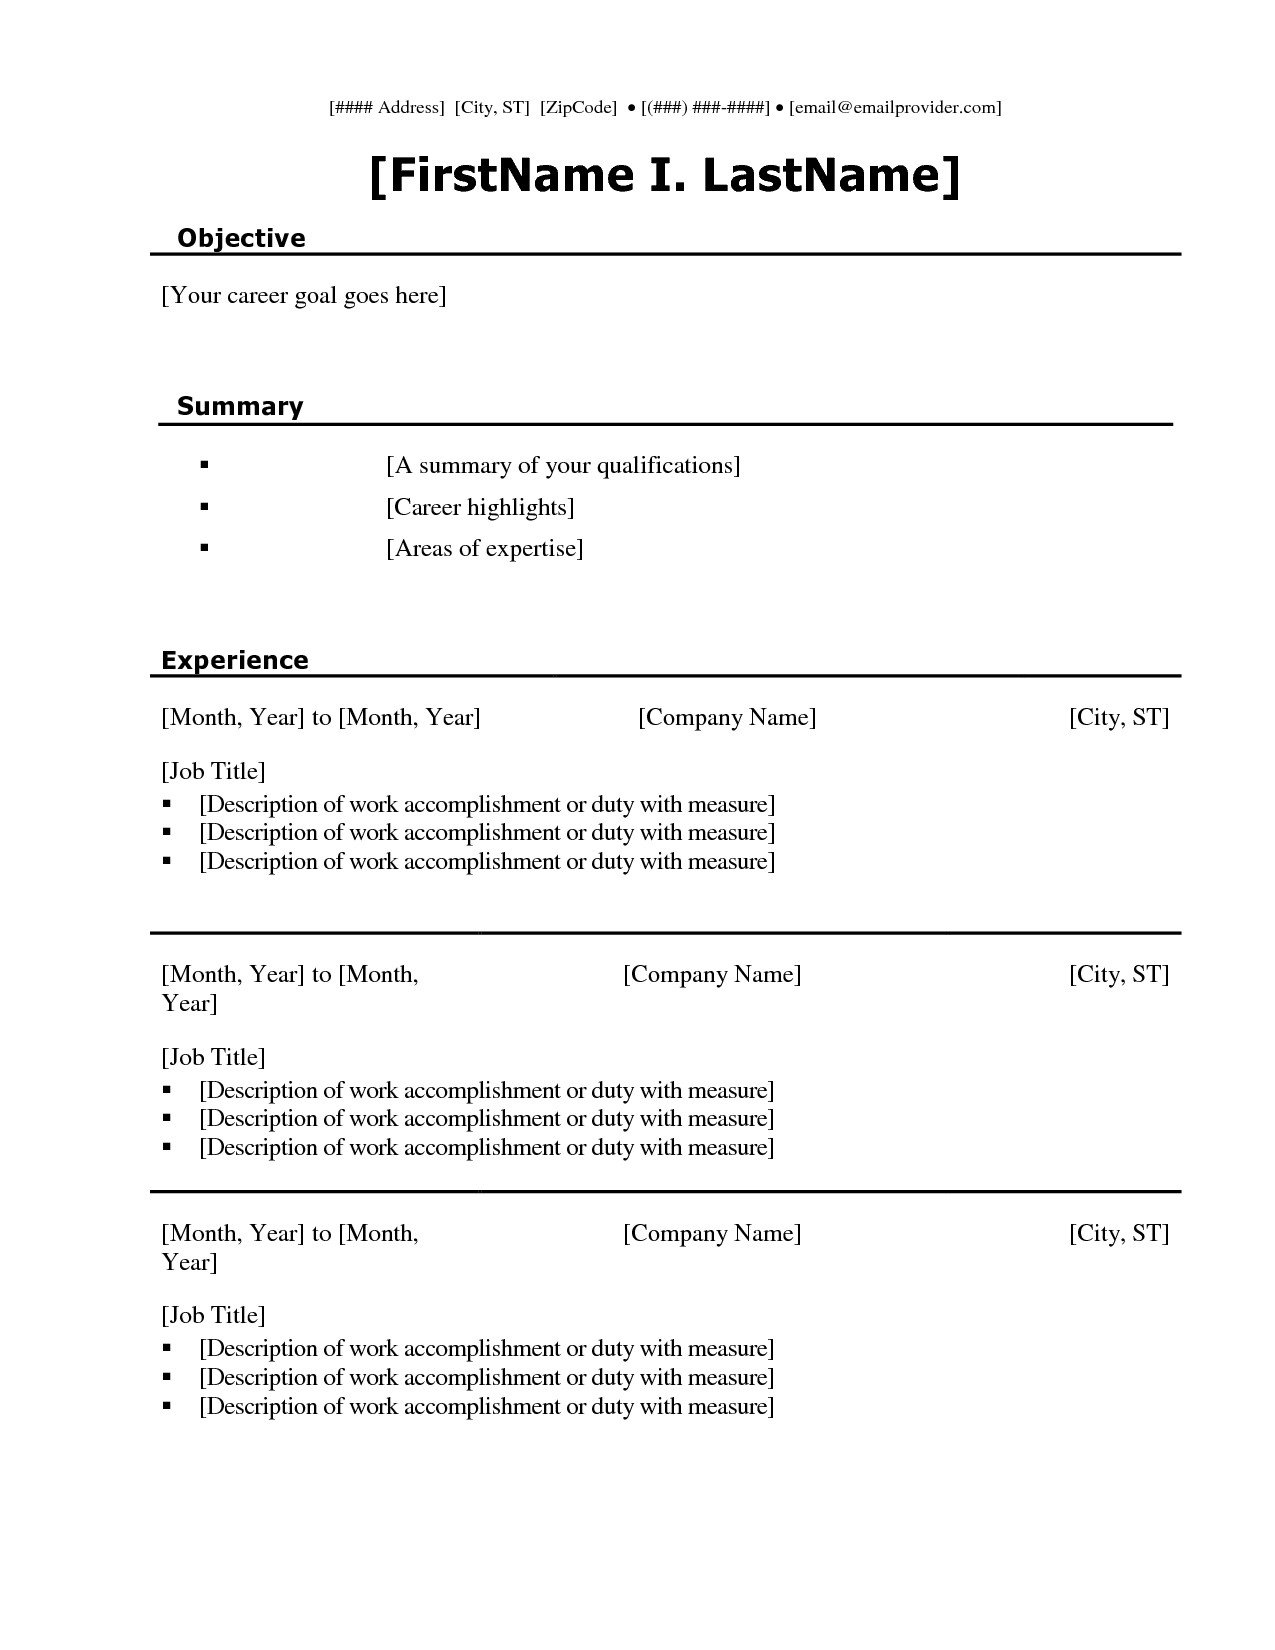 Resume Templates In Word Microsoft Word Resume Templates